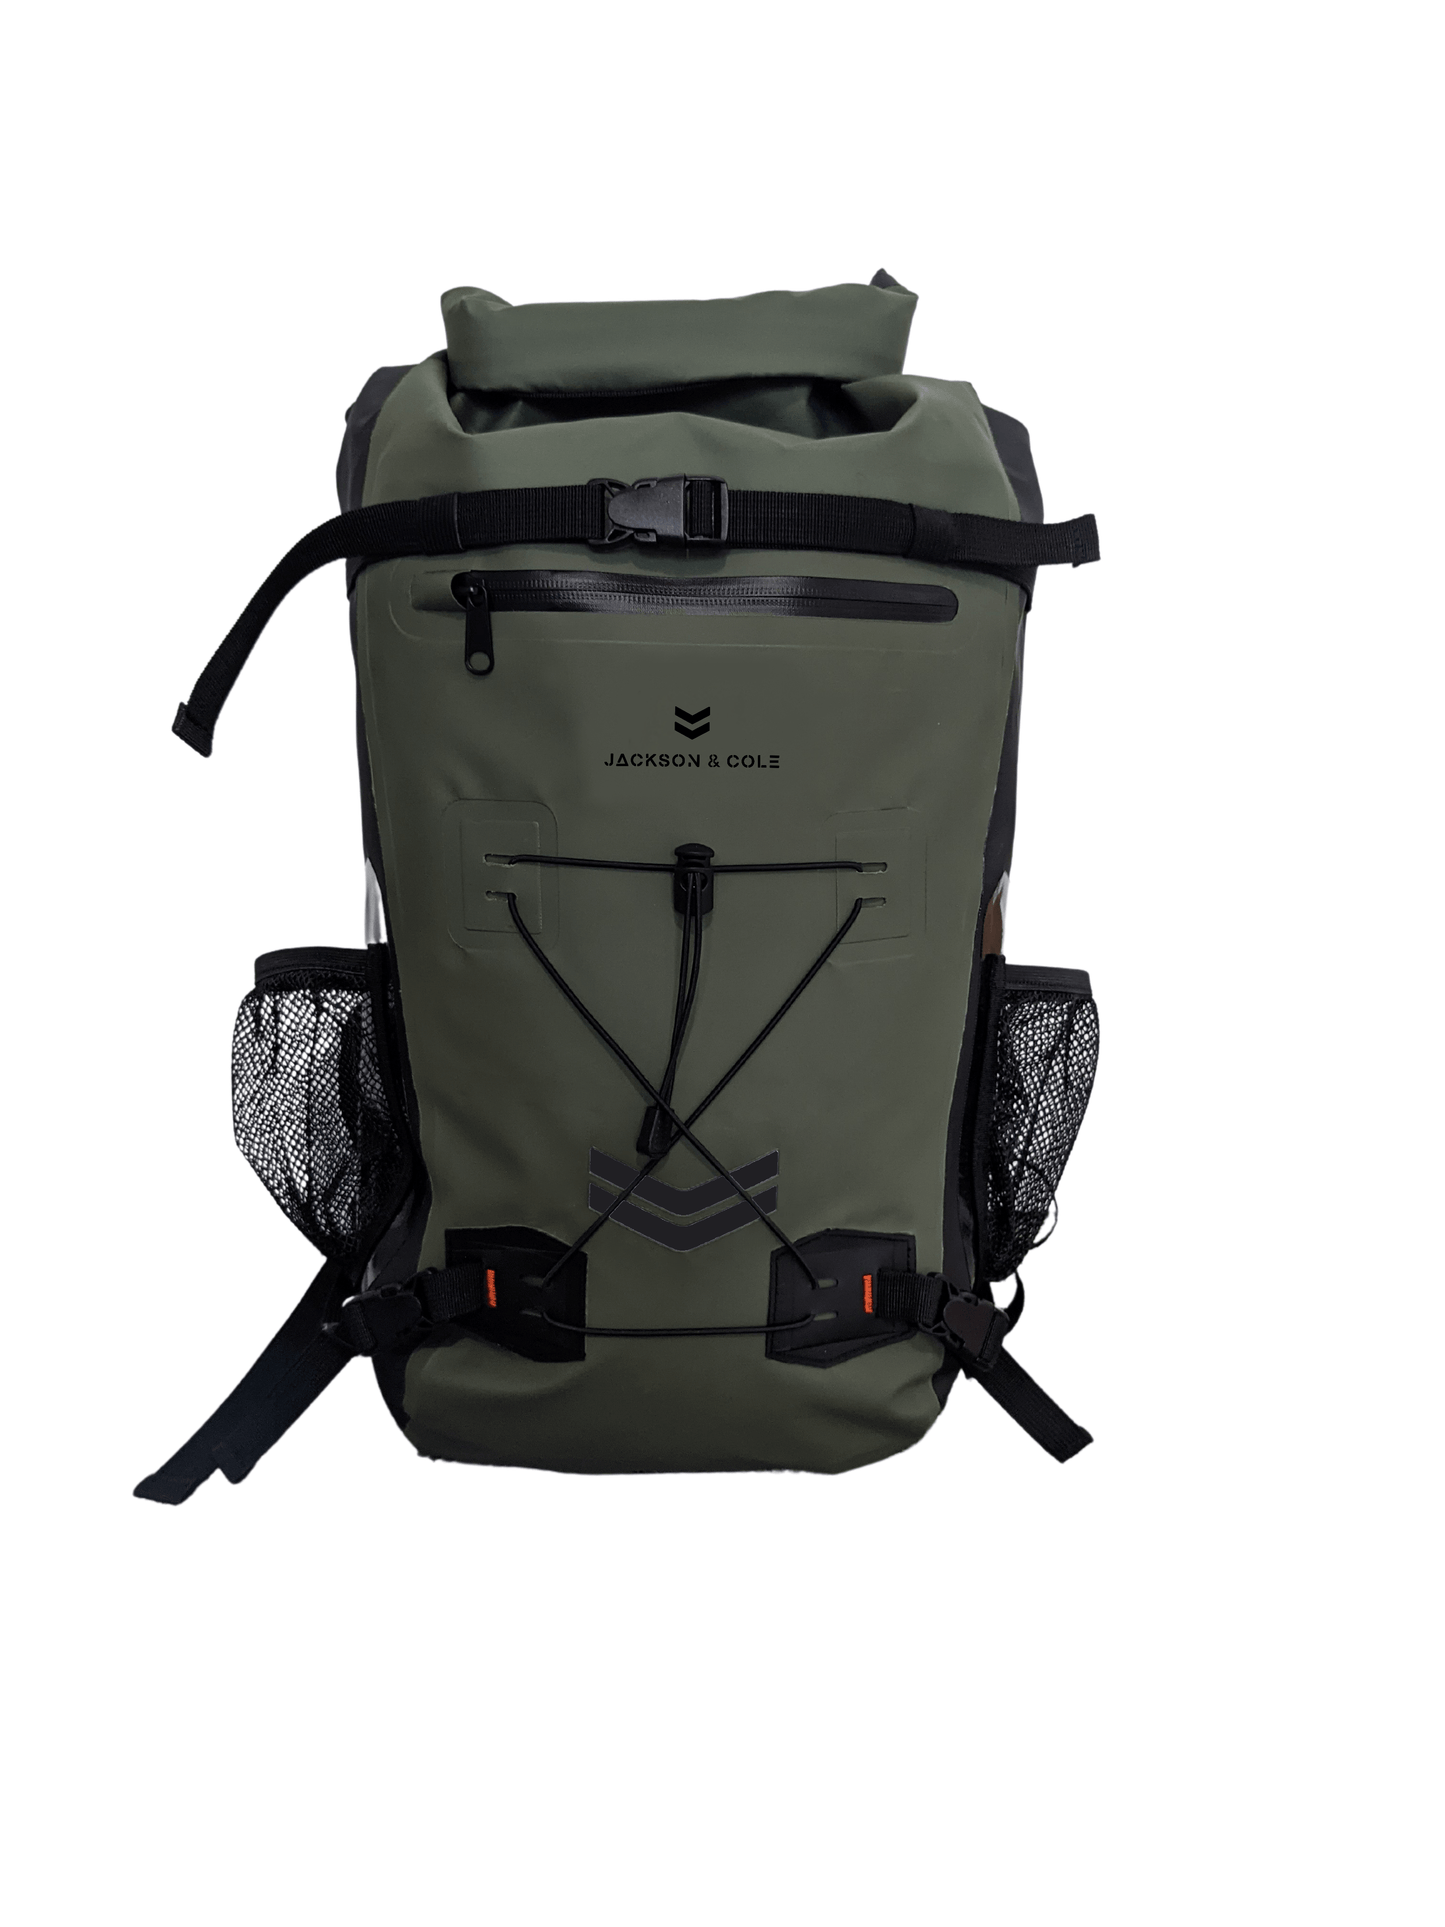 Aonyx 25 Backpack closed to rear